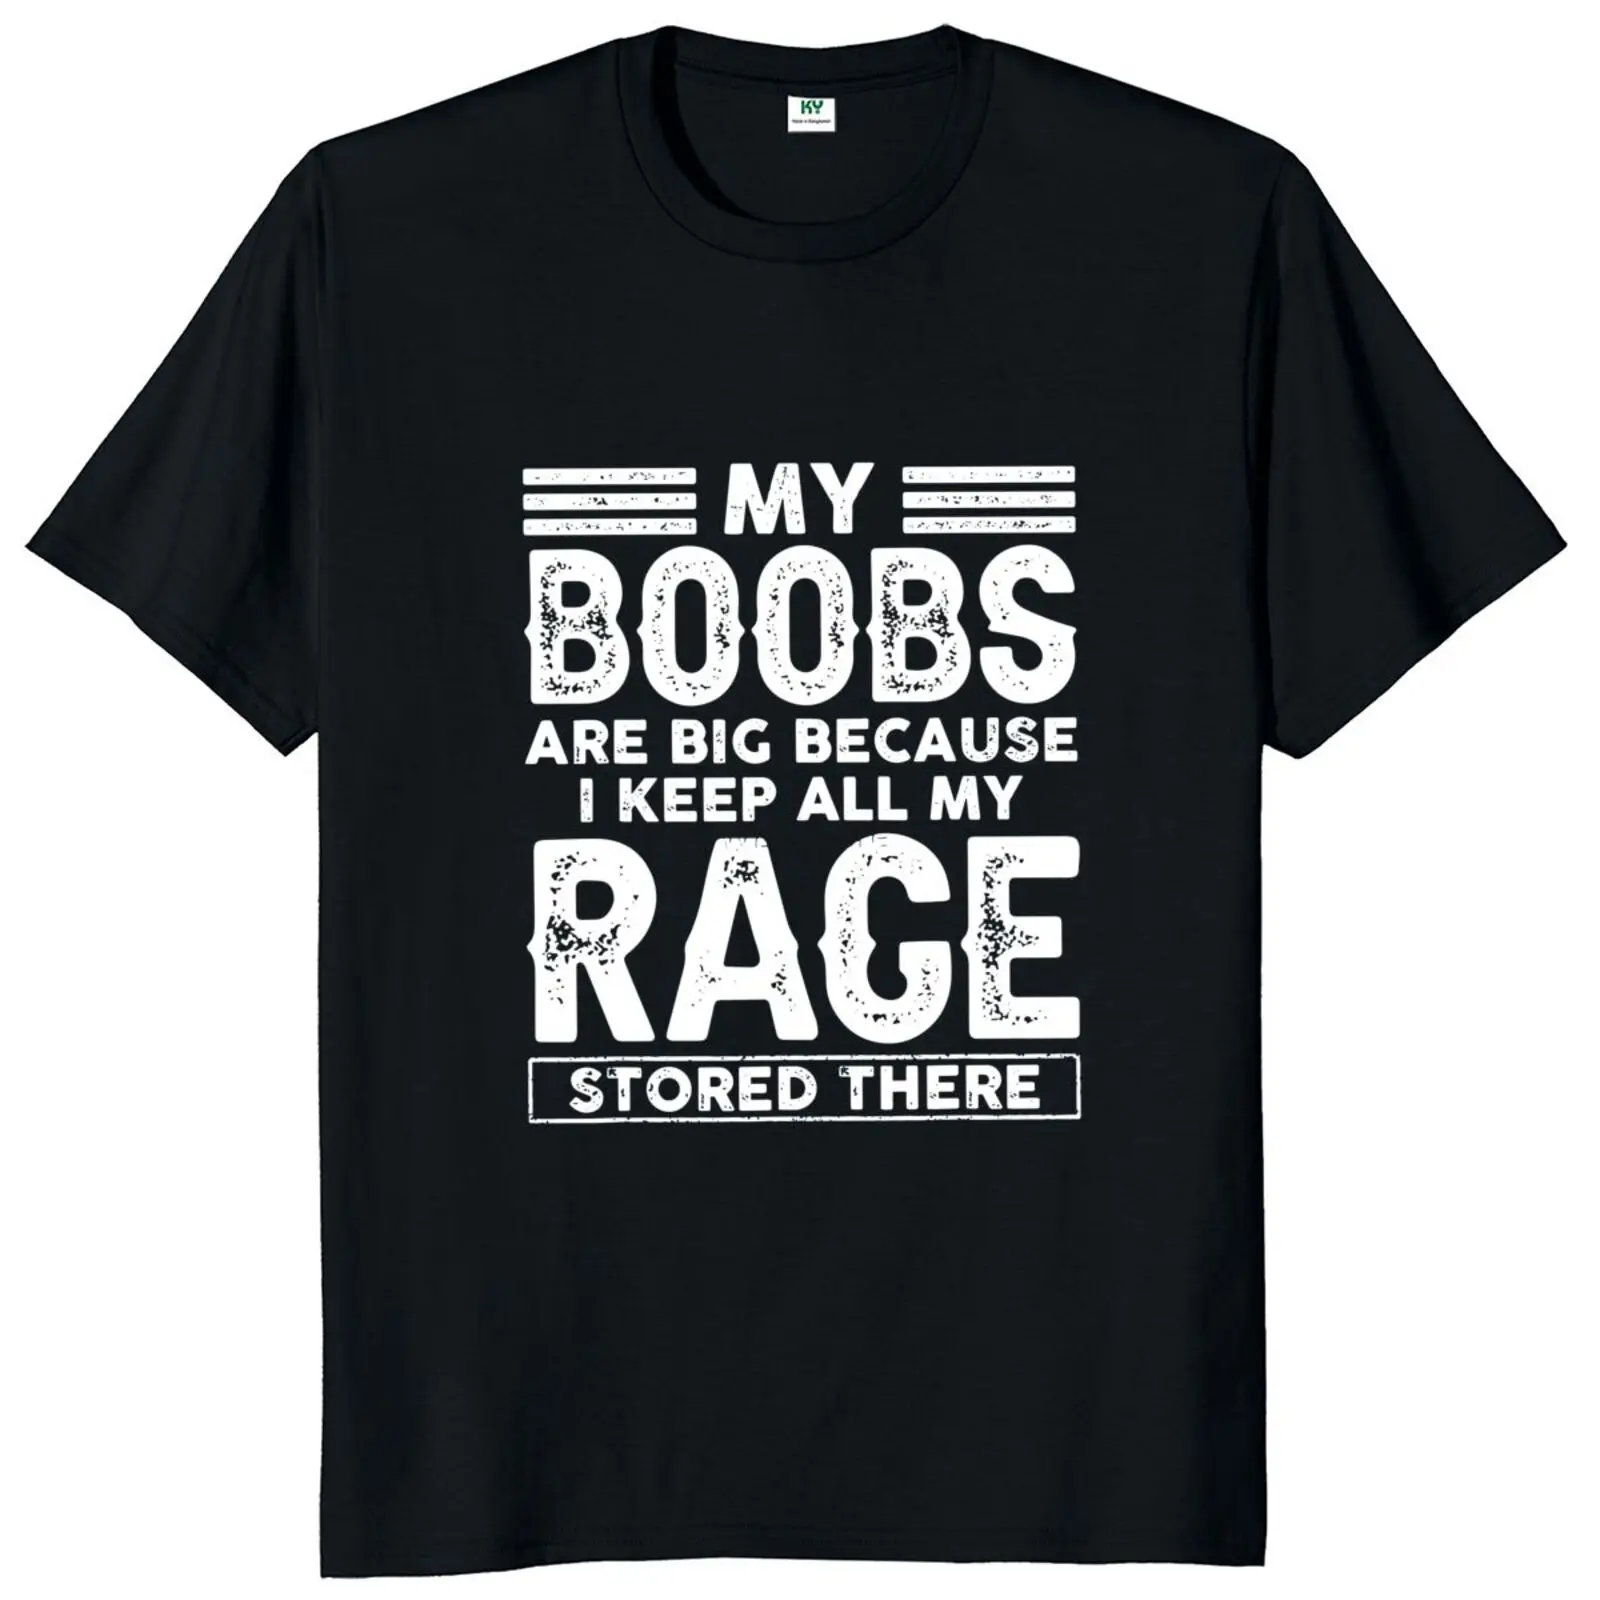 

My Boobs Are Big Because I Keep All My Rage Stored There T Shirt Funny Sayings Jokes Women Clothing Casual Unisex Cotton T-shirt